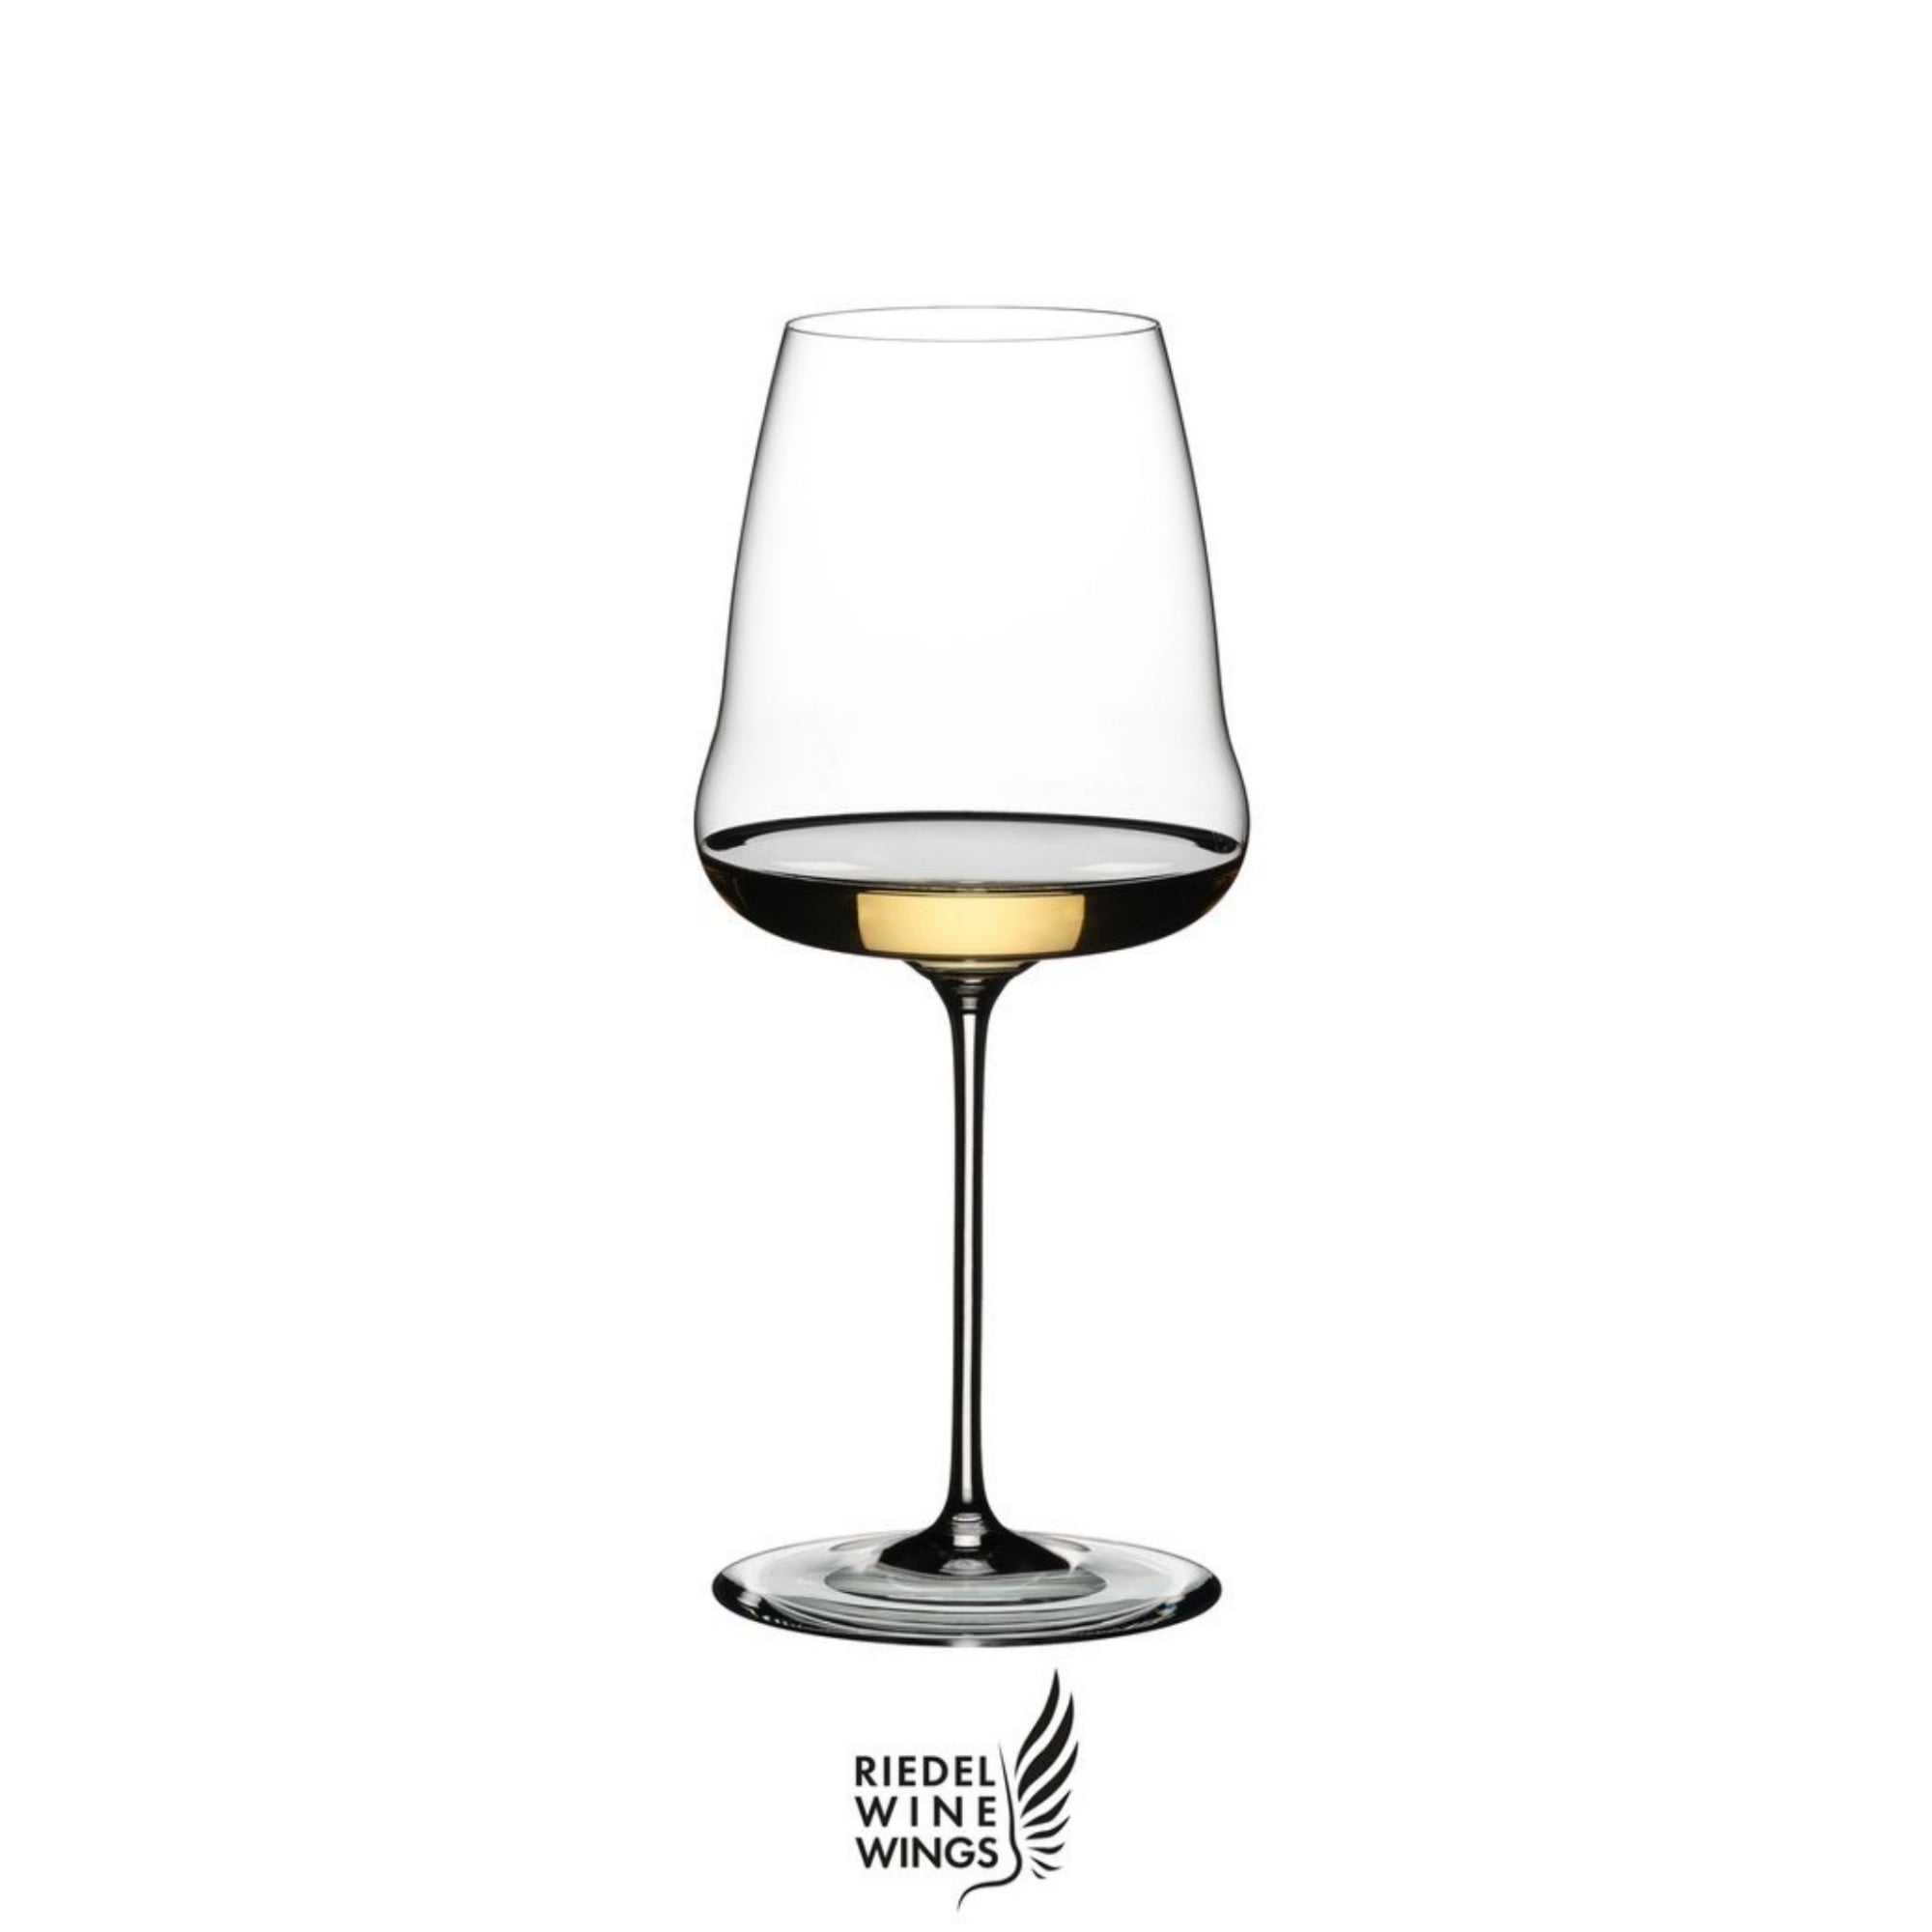 Riedel Winewings Chardonnay Goblet, Einzelpackung